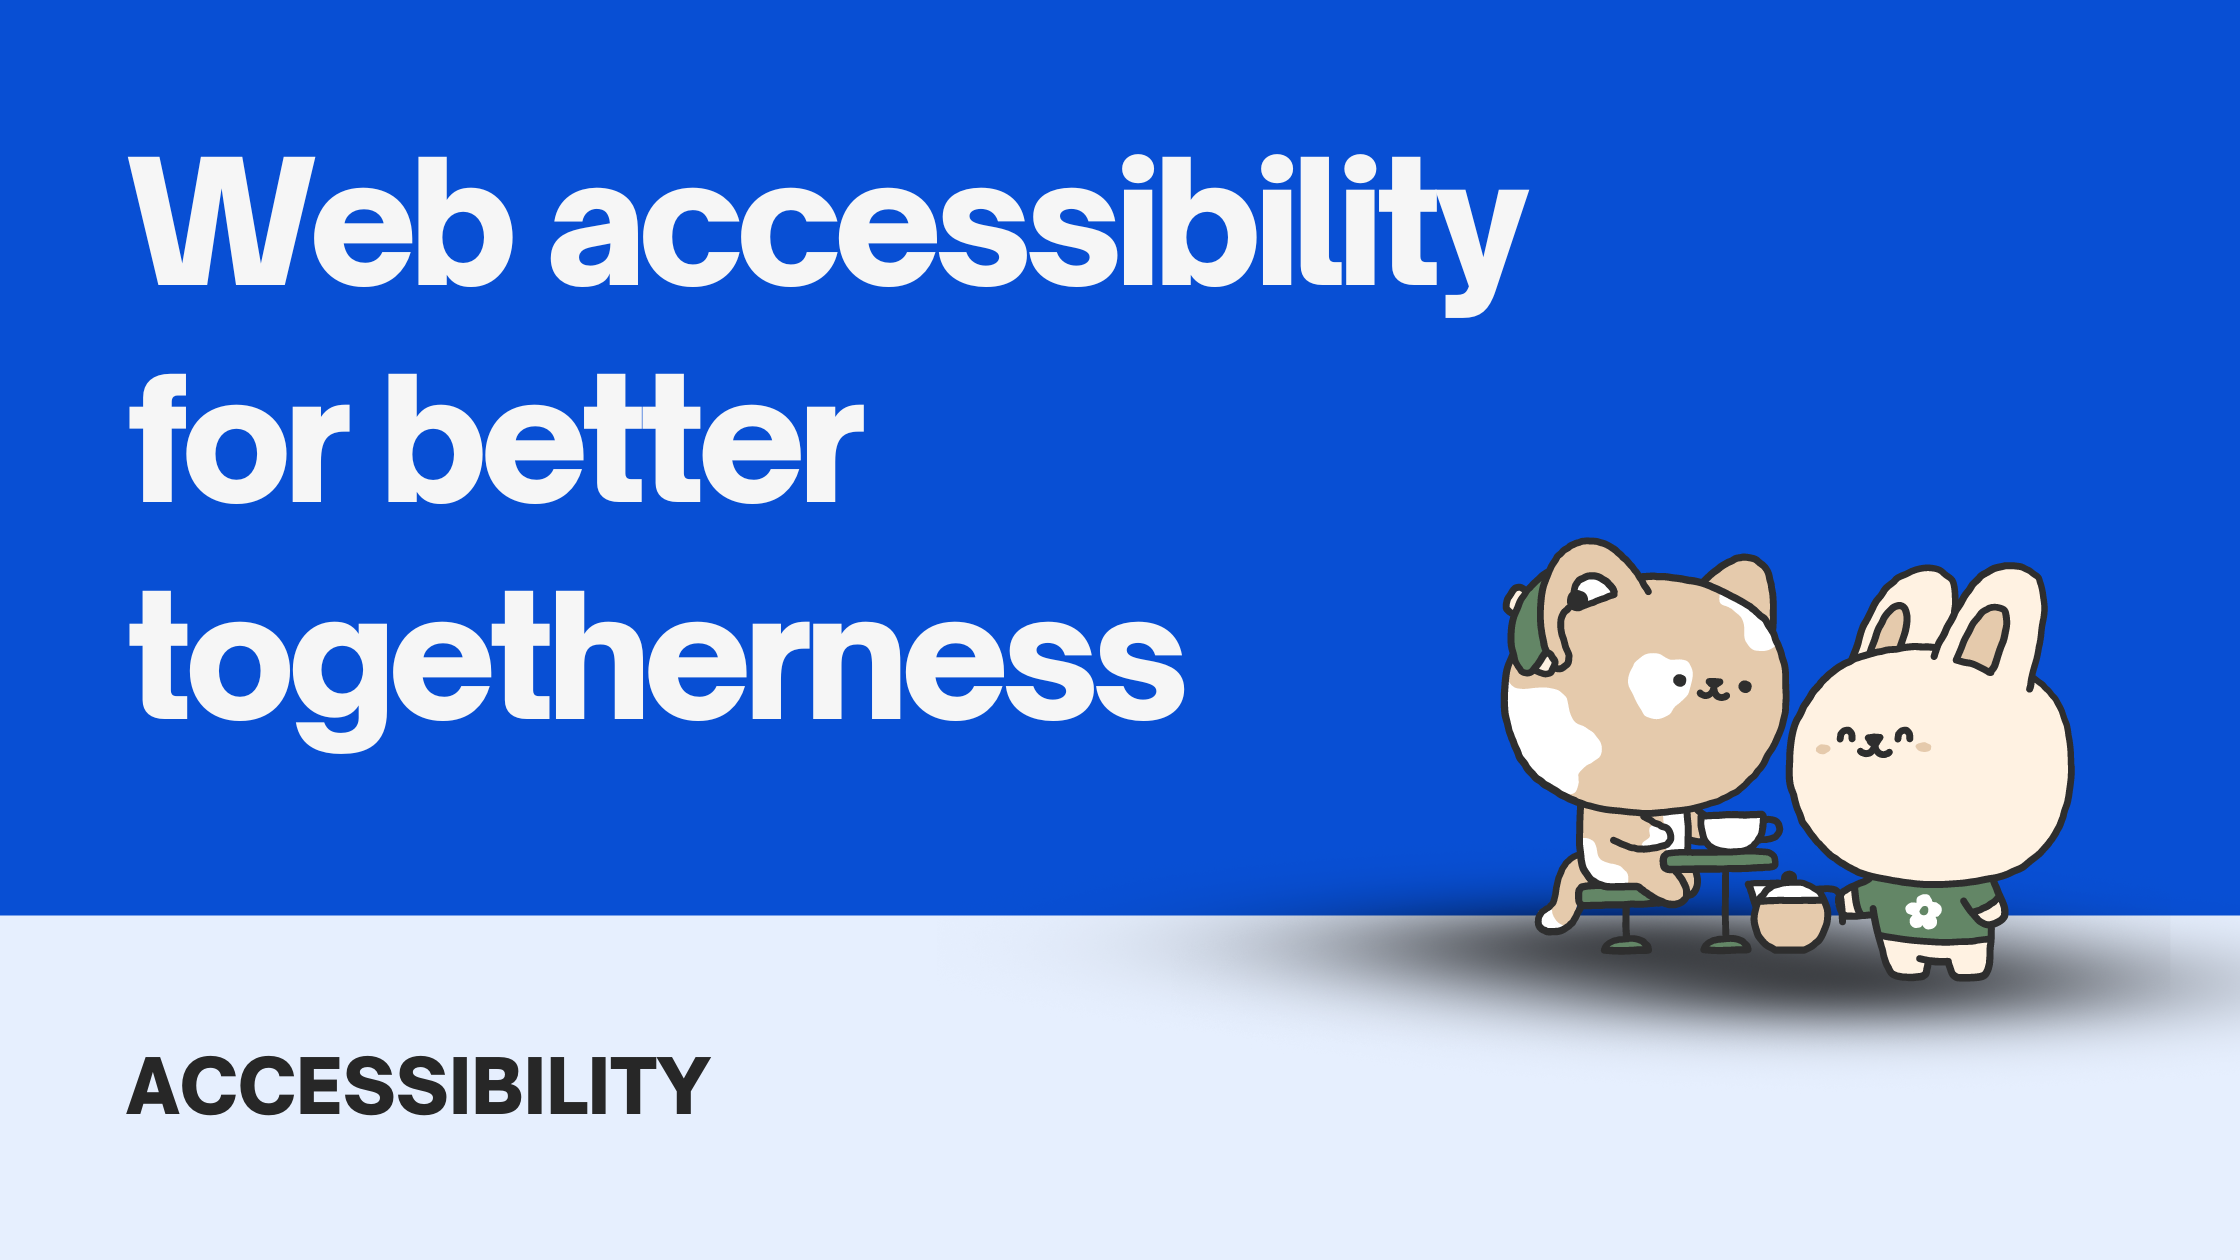 Web accessibility for better togetherness